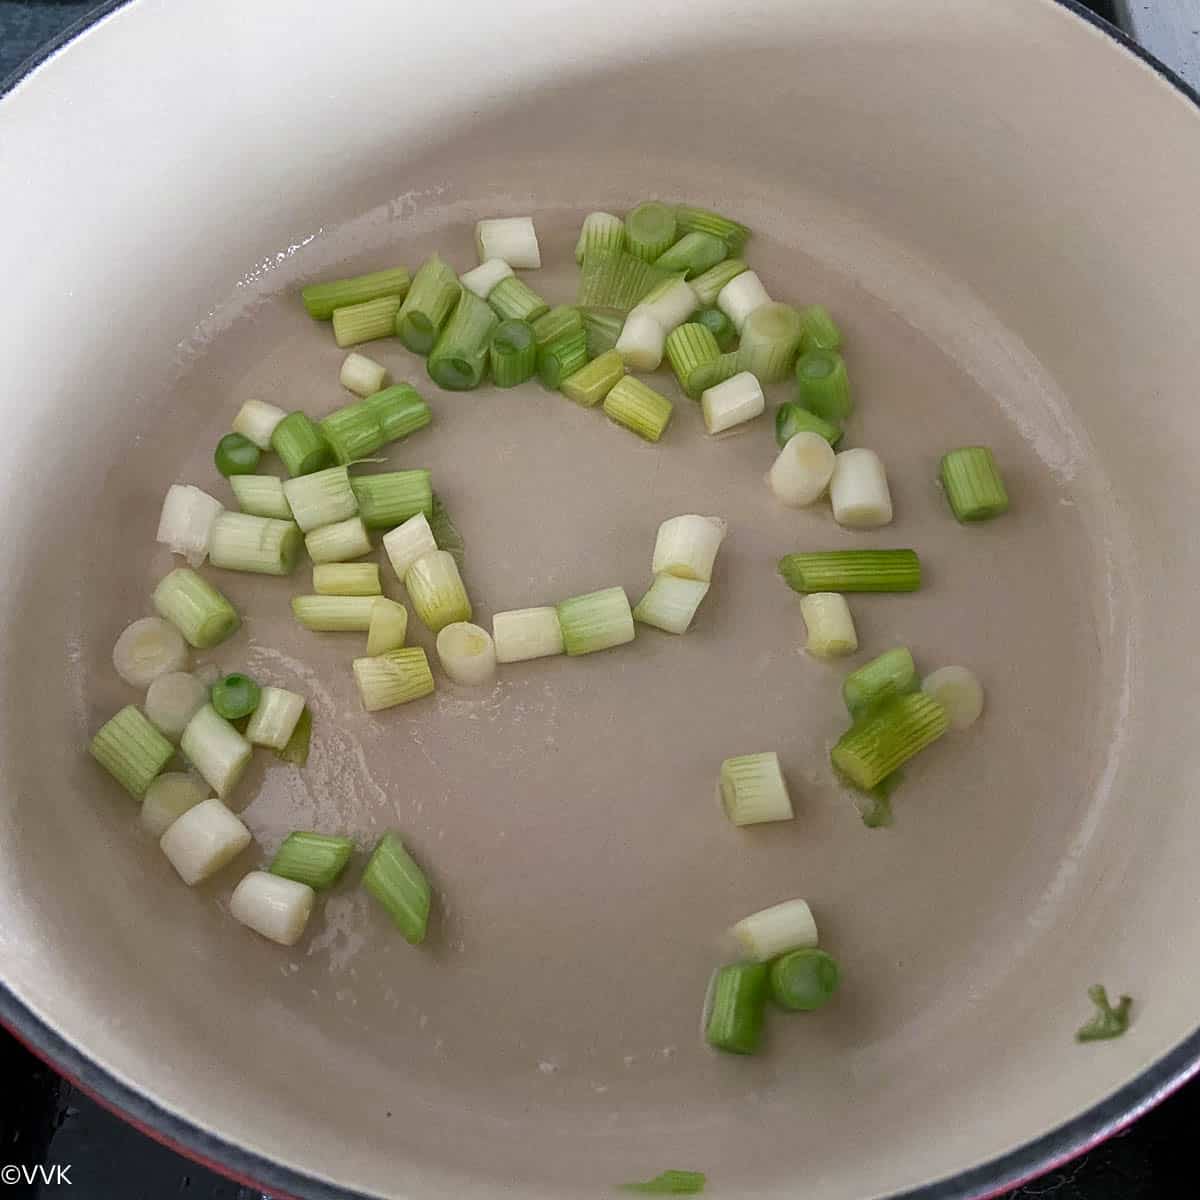 sauteing the green onions